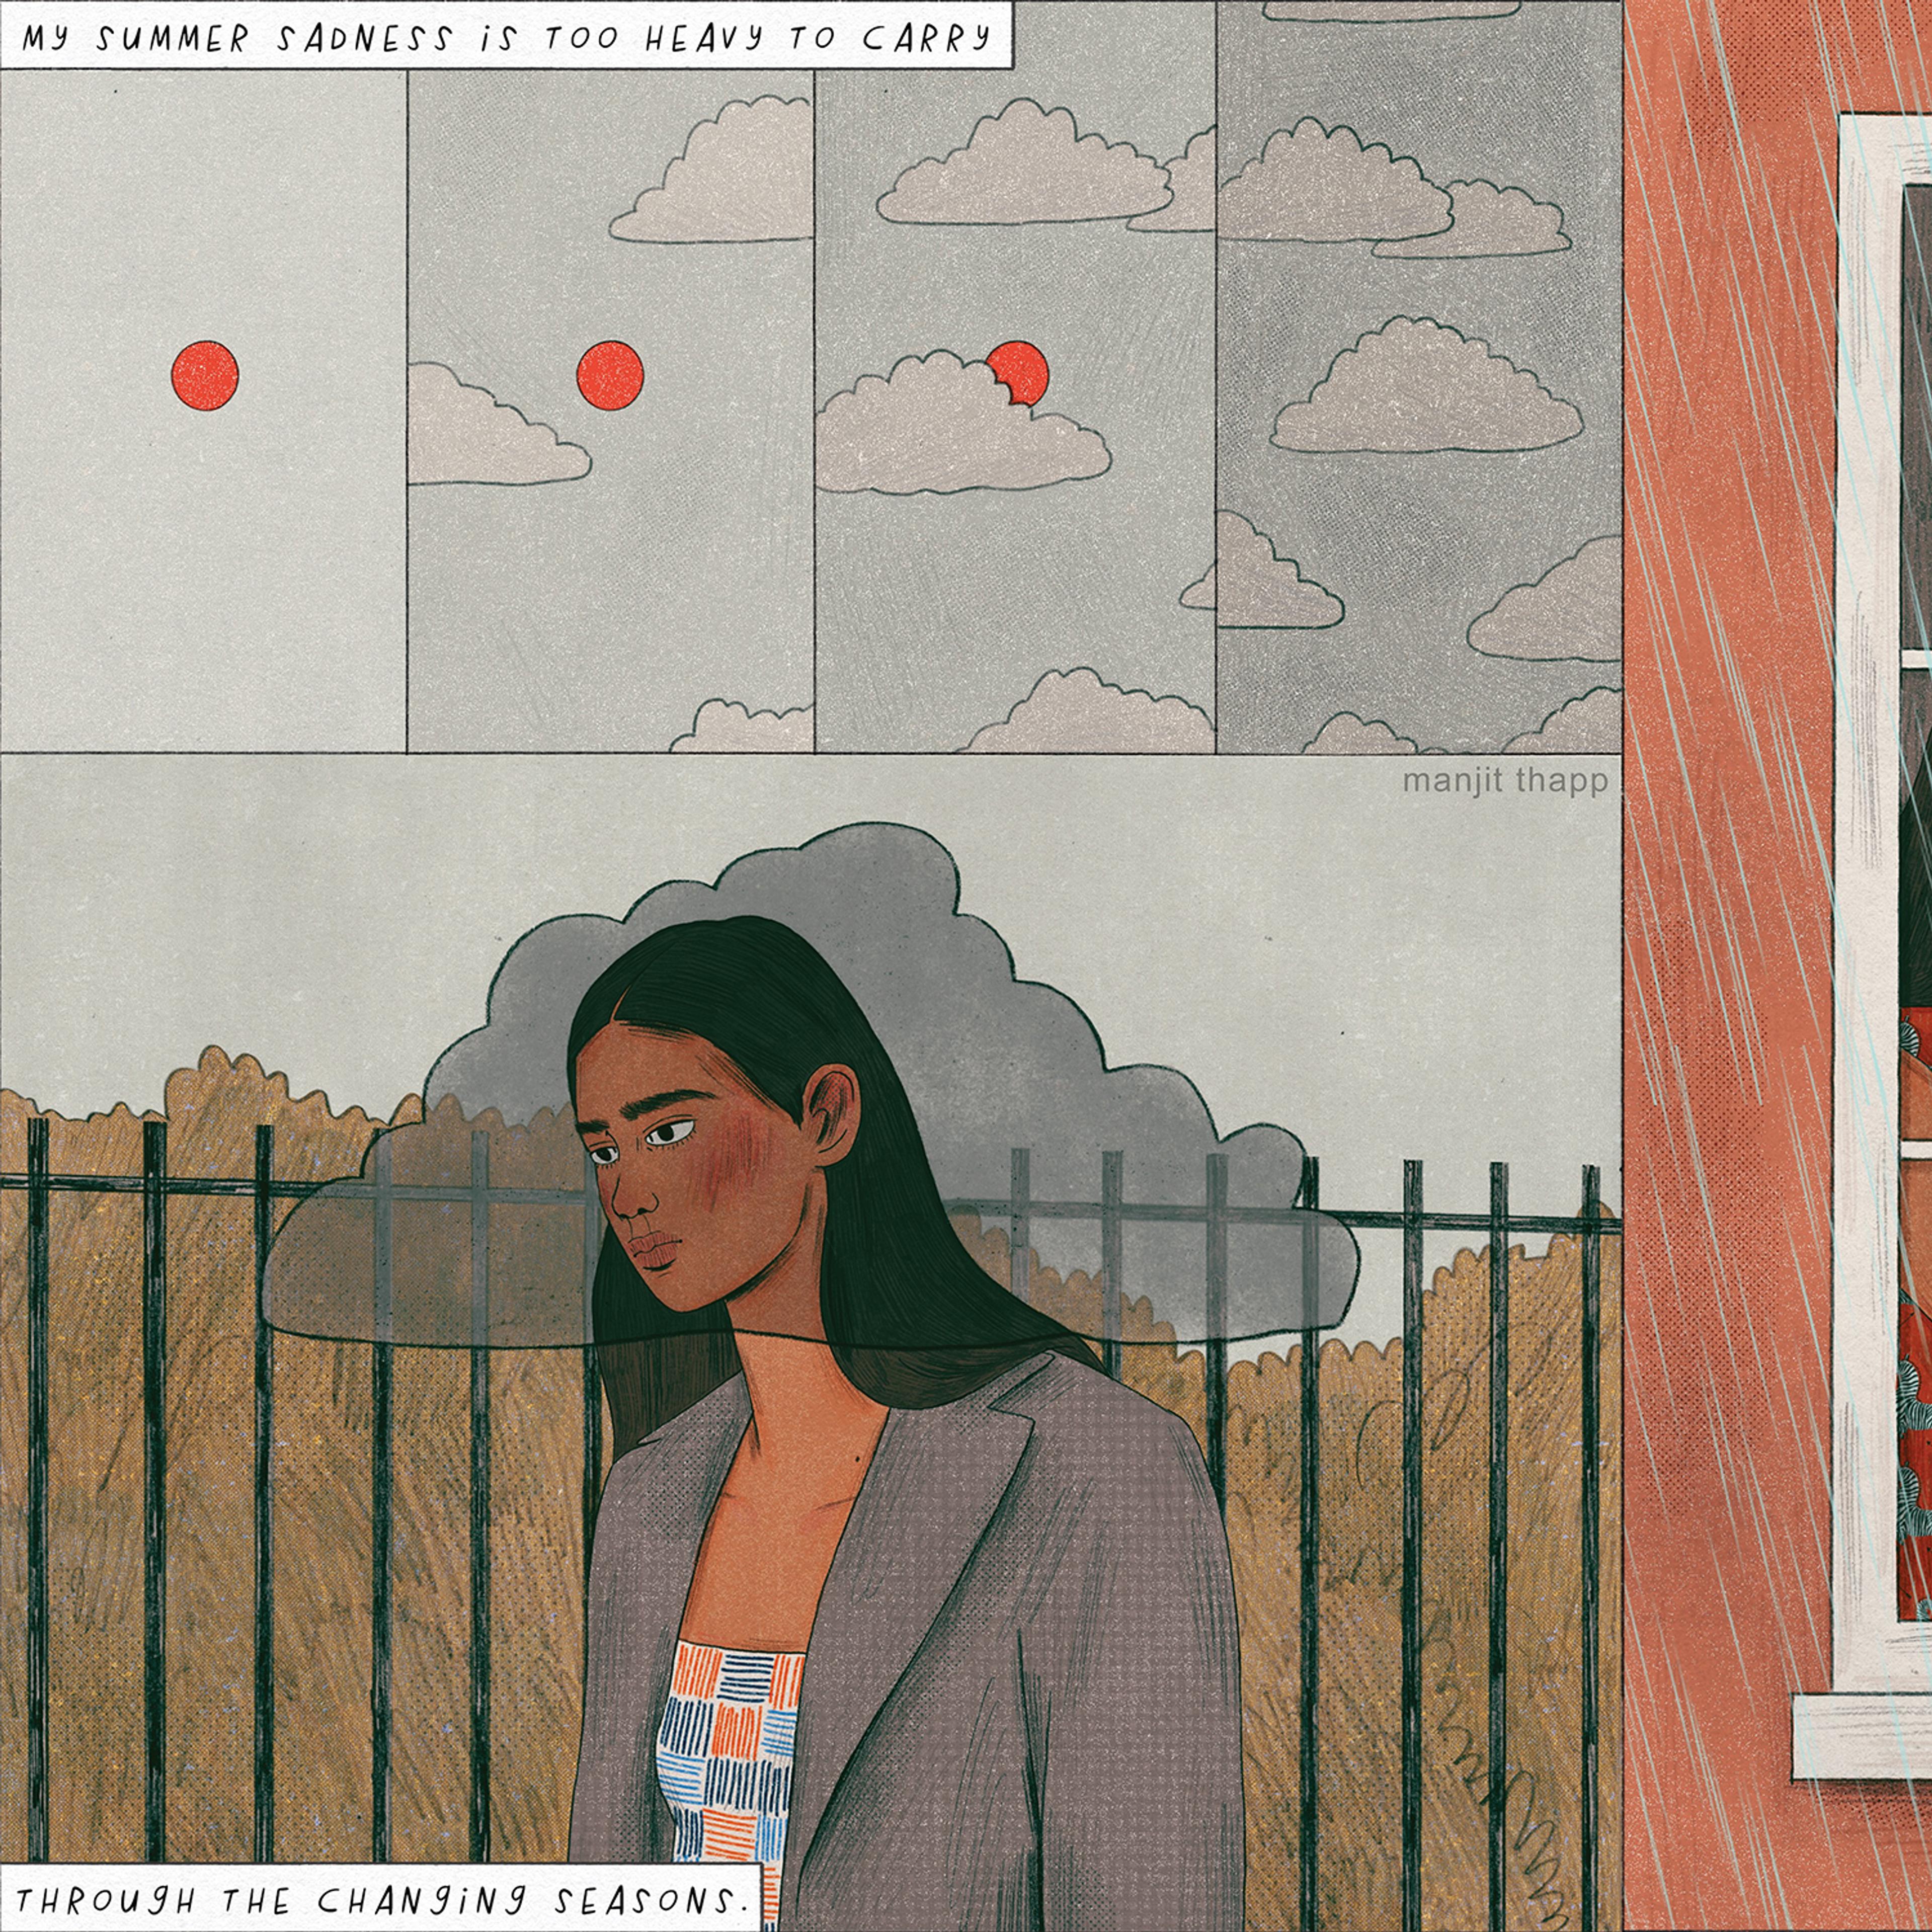 Graphic novel page showing cloudy weather juxtaposed with a sad woman with a cloud on her head